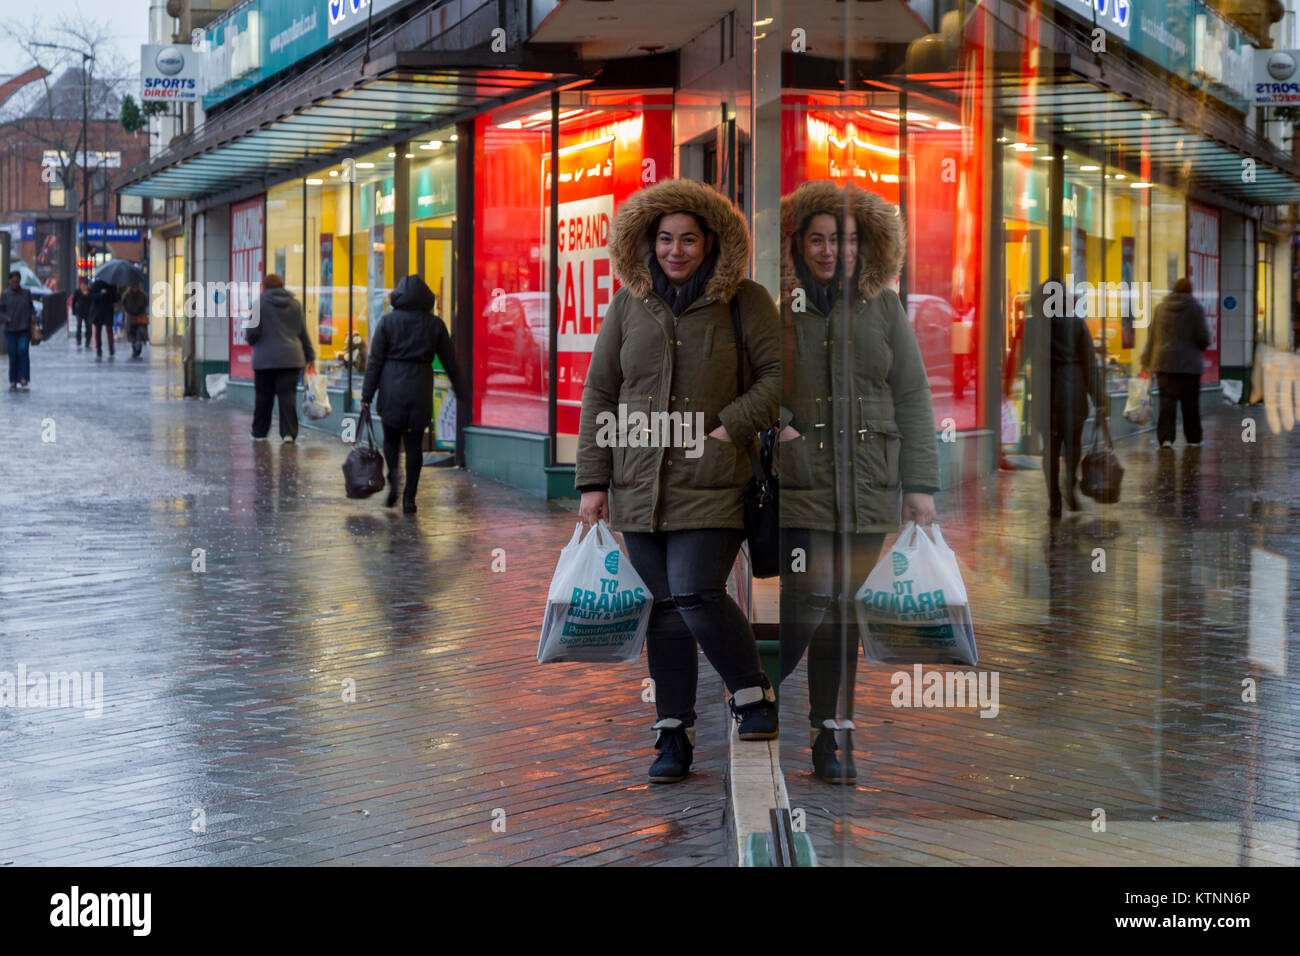 Northampton, Weather, U.K. 27th December 2017. Heavy overnight rain with snow tuning to sleet this morning giving a very wet and cold start to the day, Abington st in the town centre is very quite this morning with very few shoppers braving the nasty conditions.  Credit: Keith J Smith./Alamy Live News Stock Photo